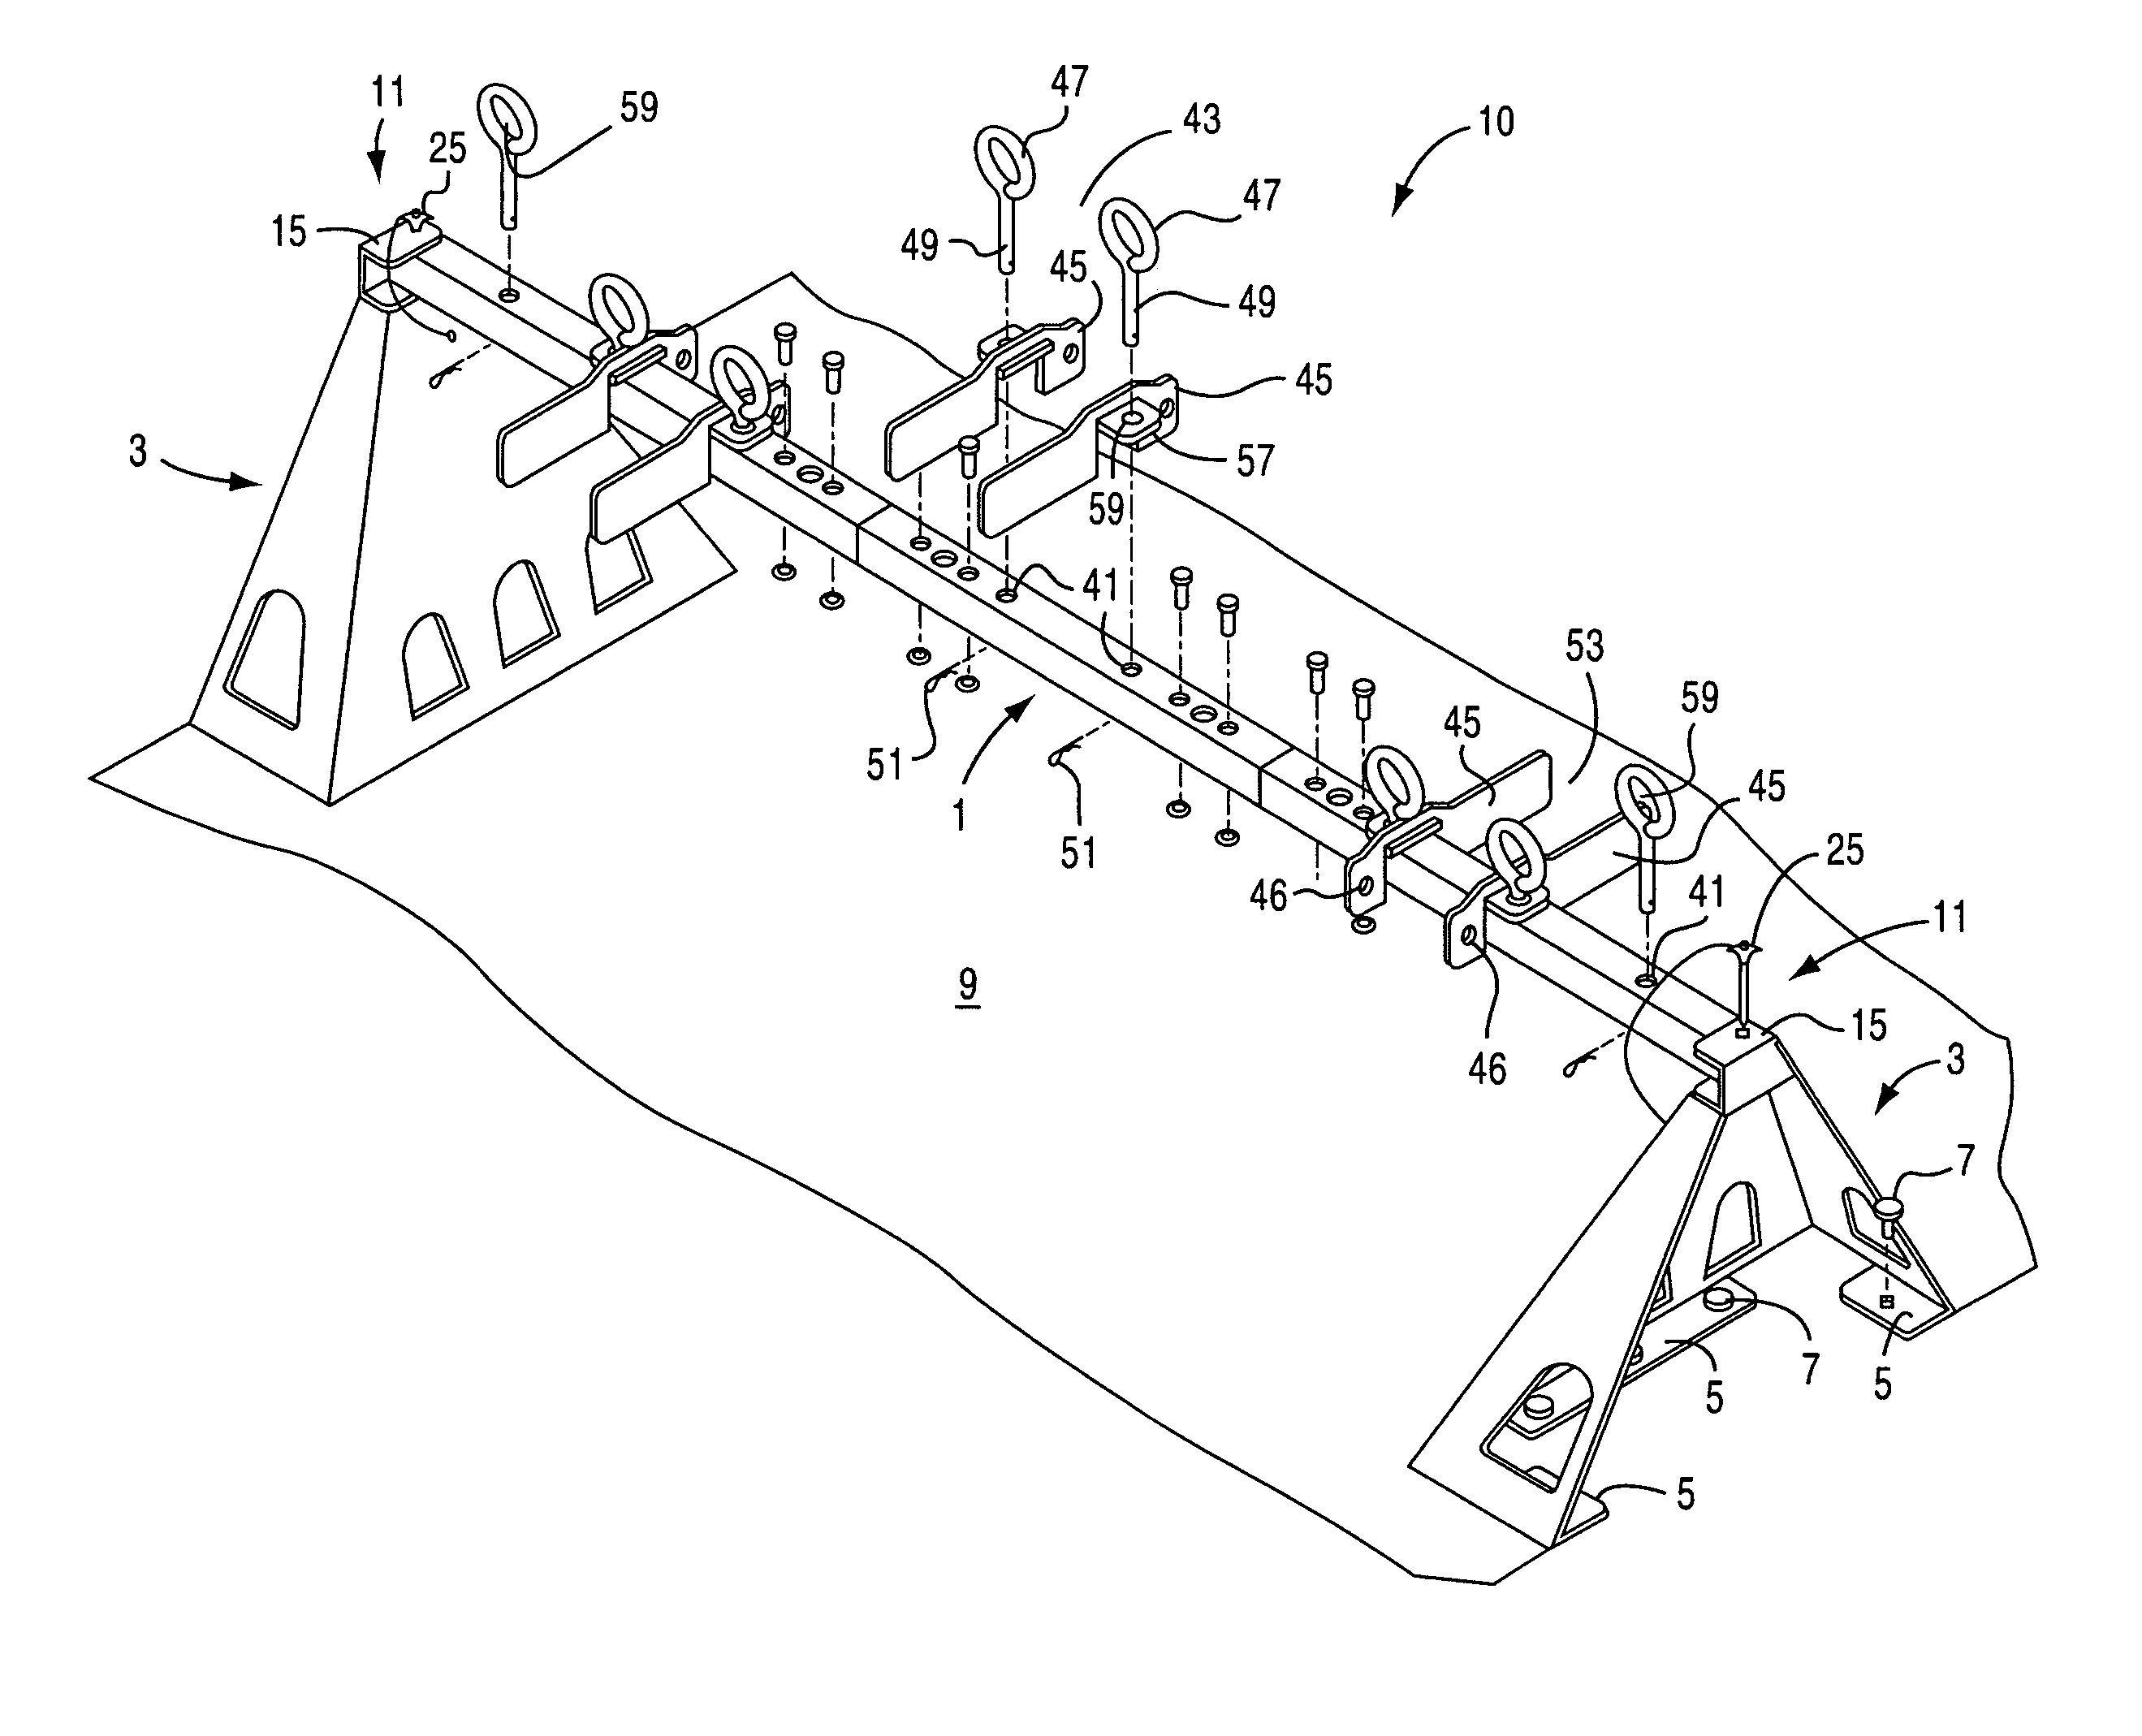 Tie down apparatus and method of use